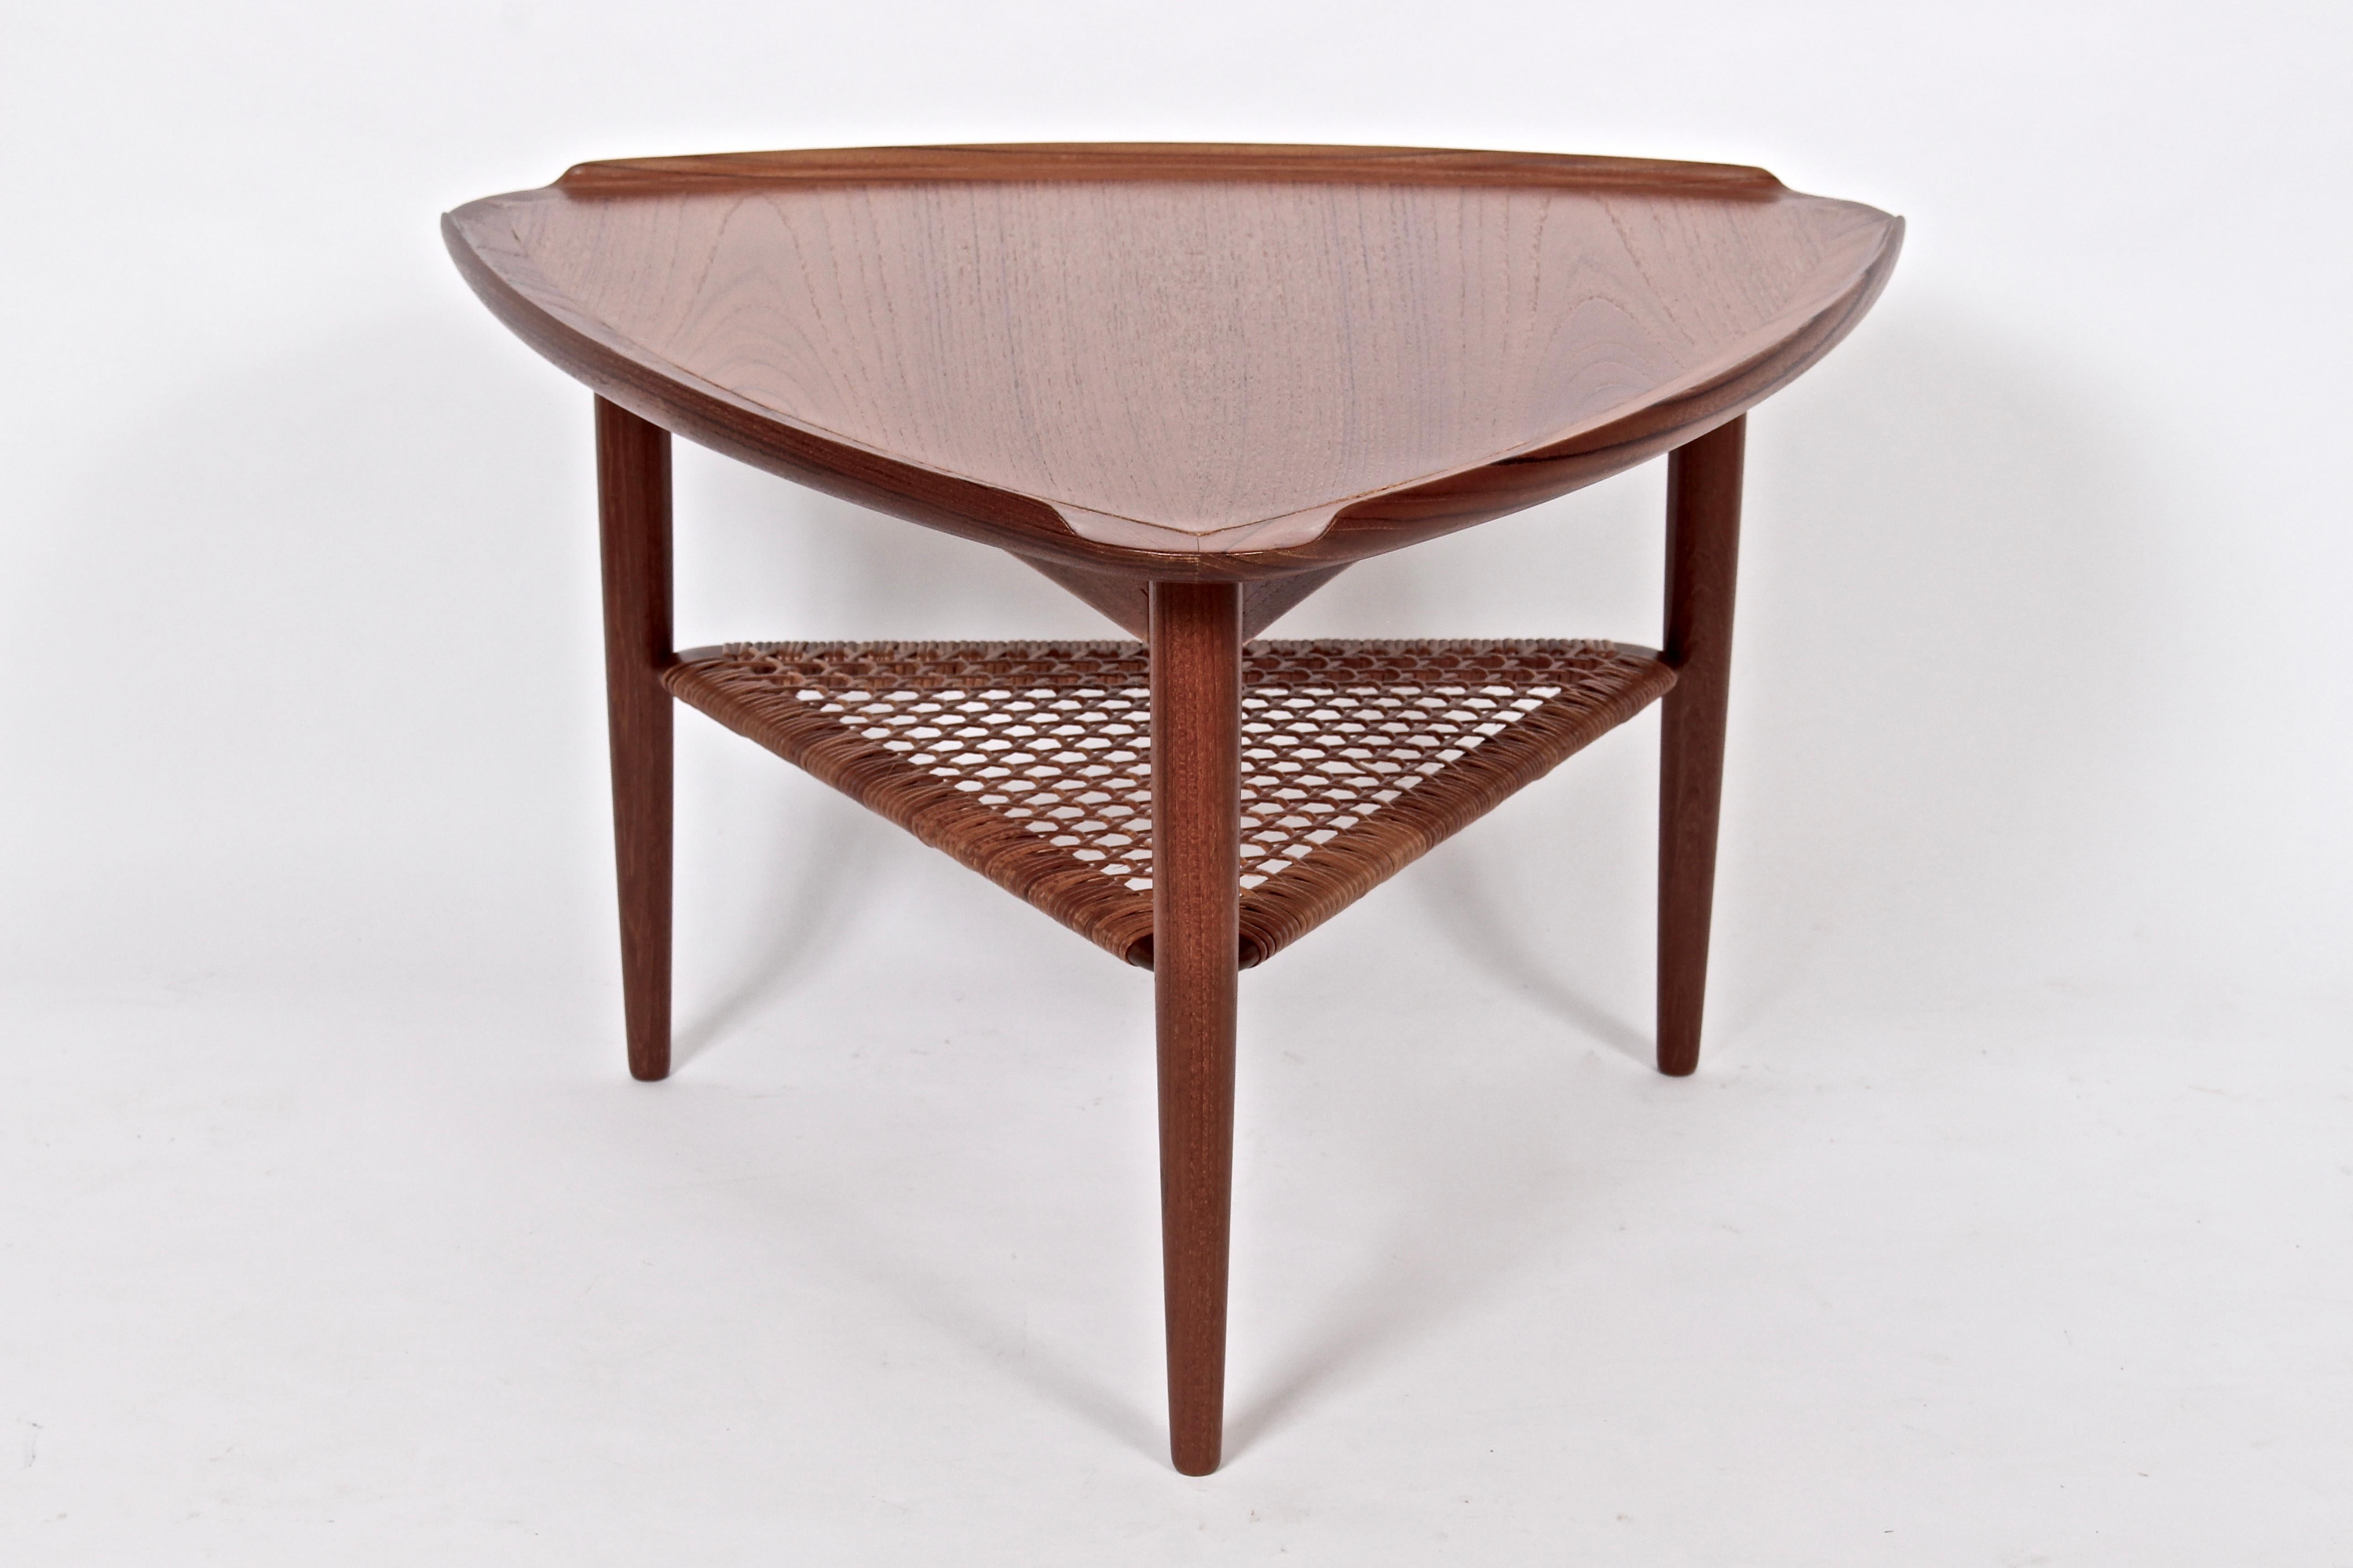 Danish Modern Poul Jensen for Selig Importers Teak & Woven Cane guitar pick coffee table, occasional table, side table. Featuring a smooth, seamed and lipped triangular Teak surface, braced turned solid Teak legs with woven Cane shelf. Legs 21 D x